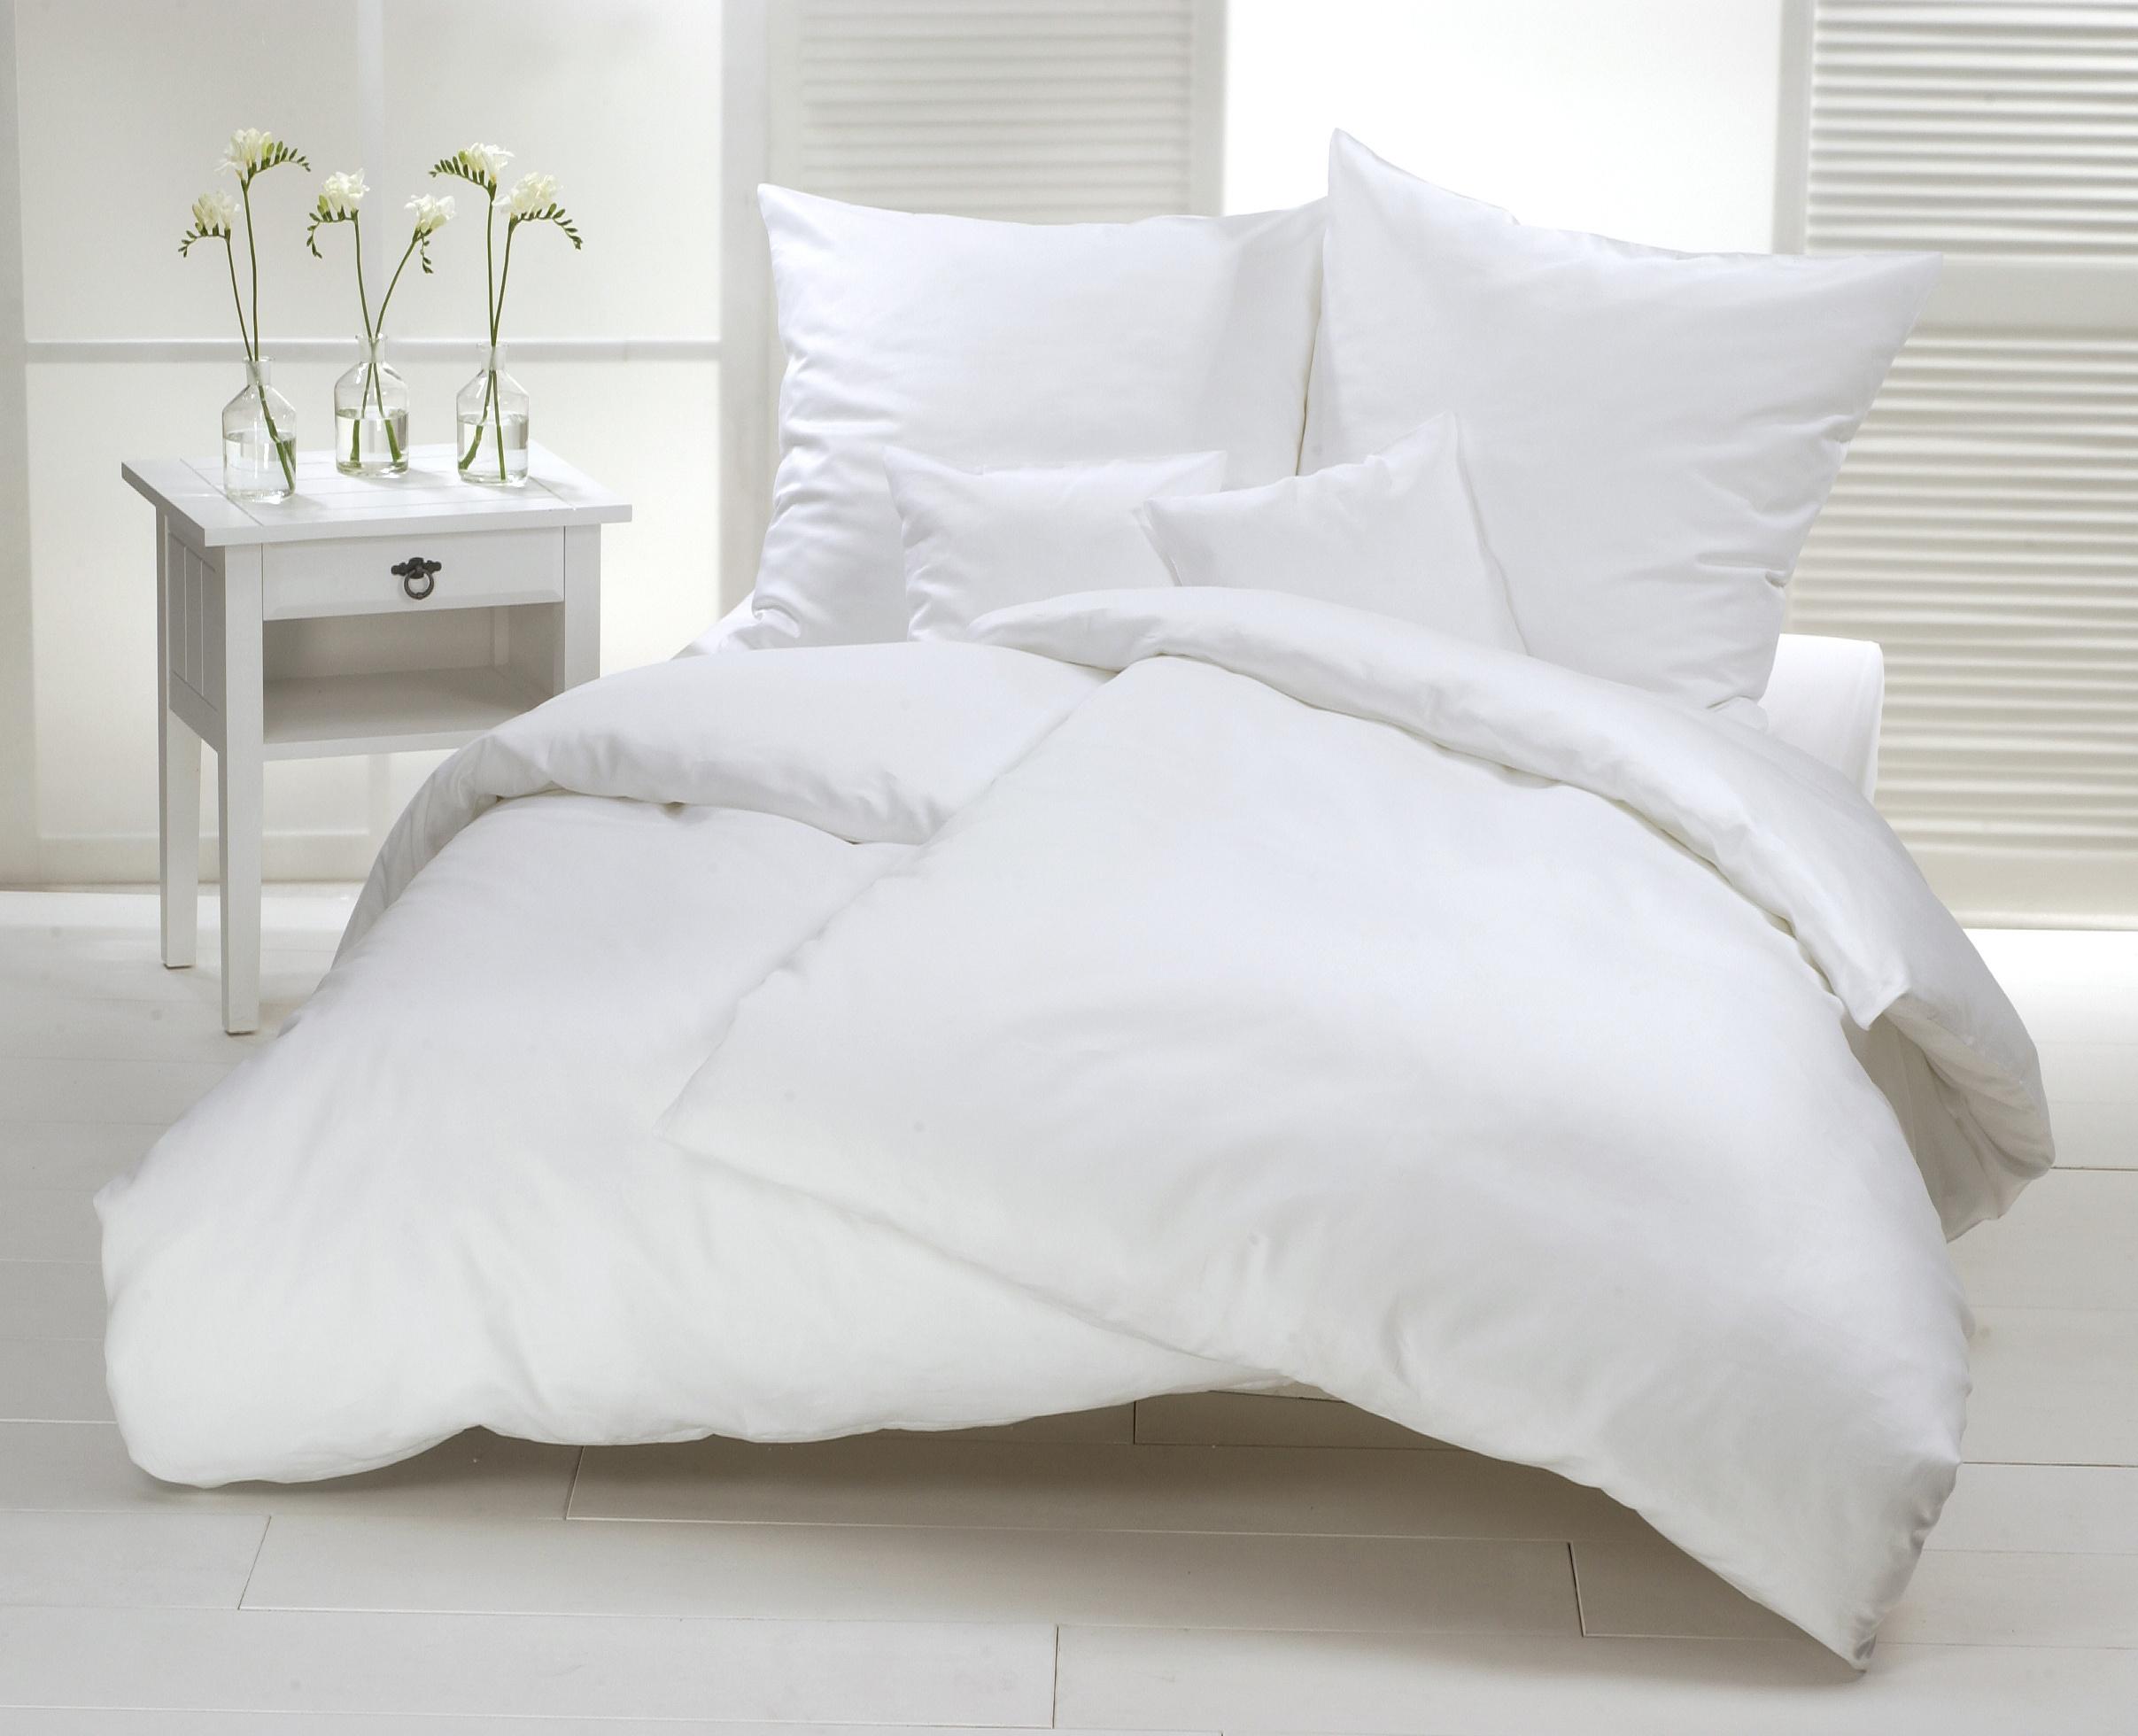 How To Find the Most Luxurious Bedding